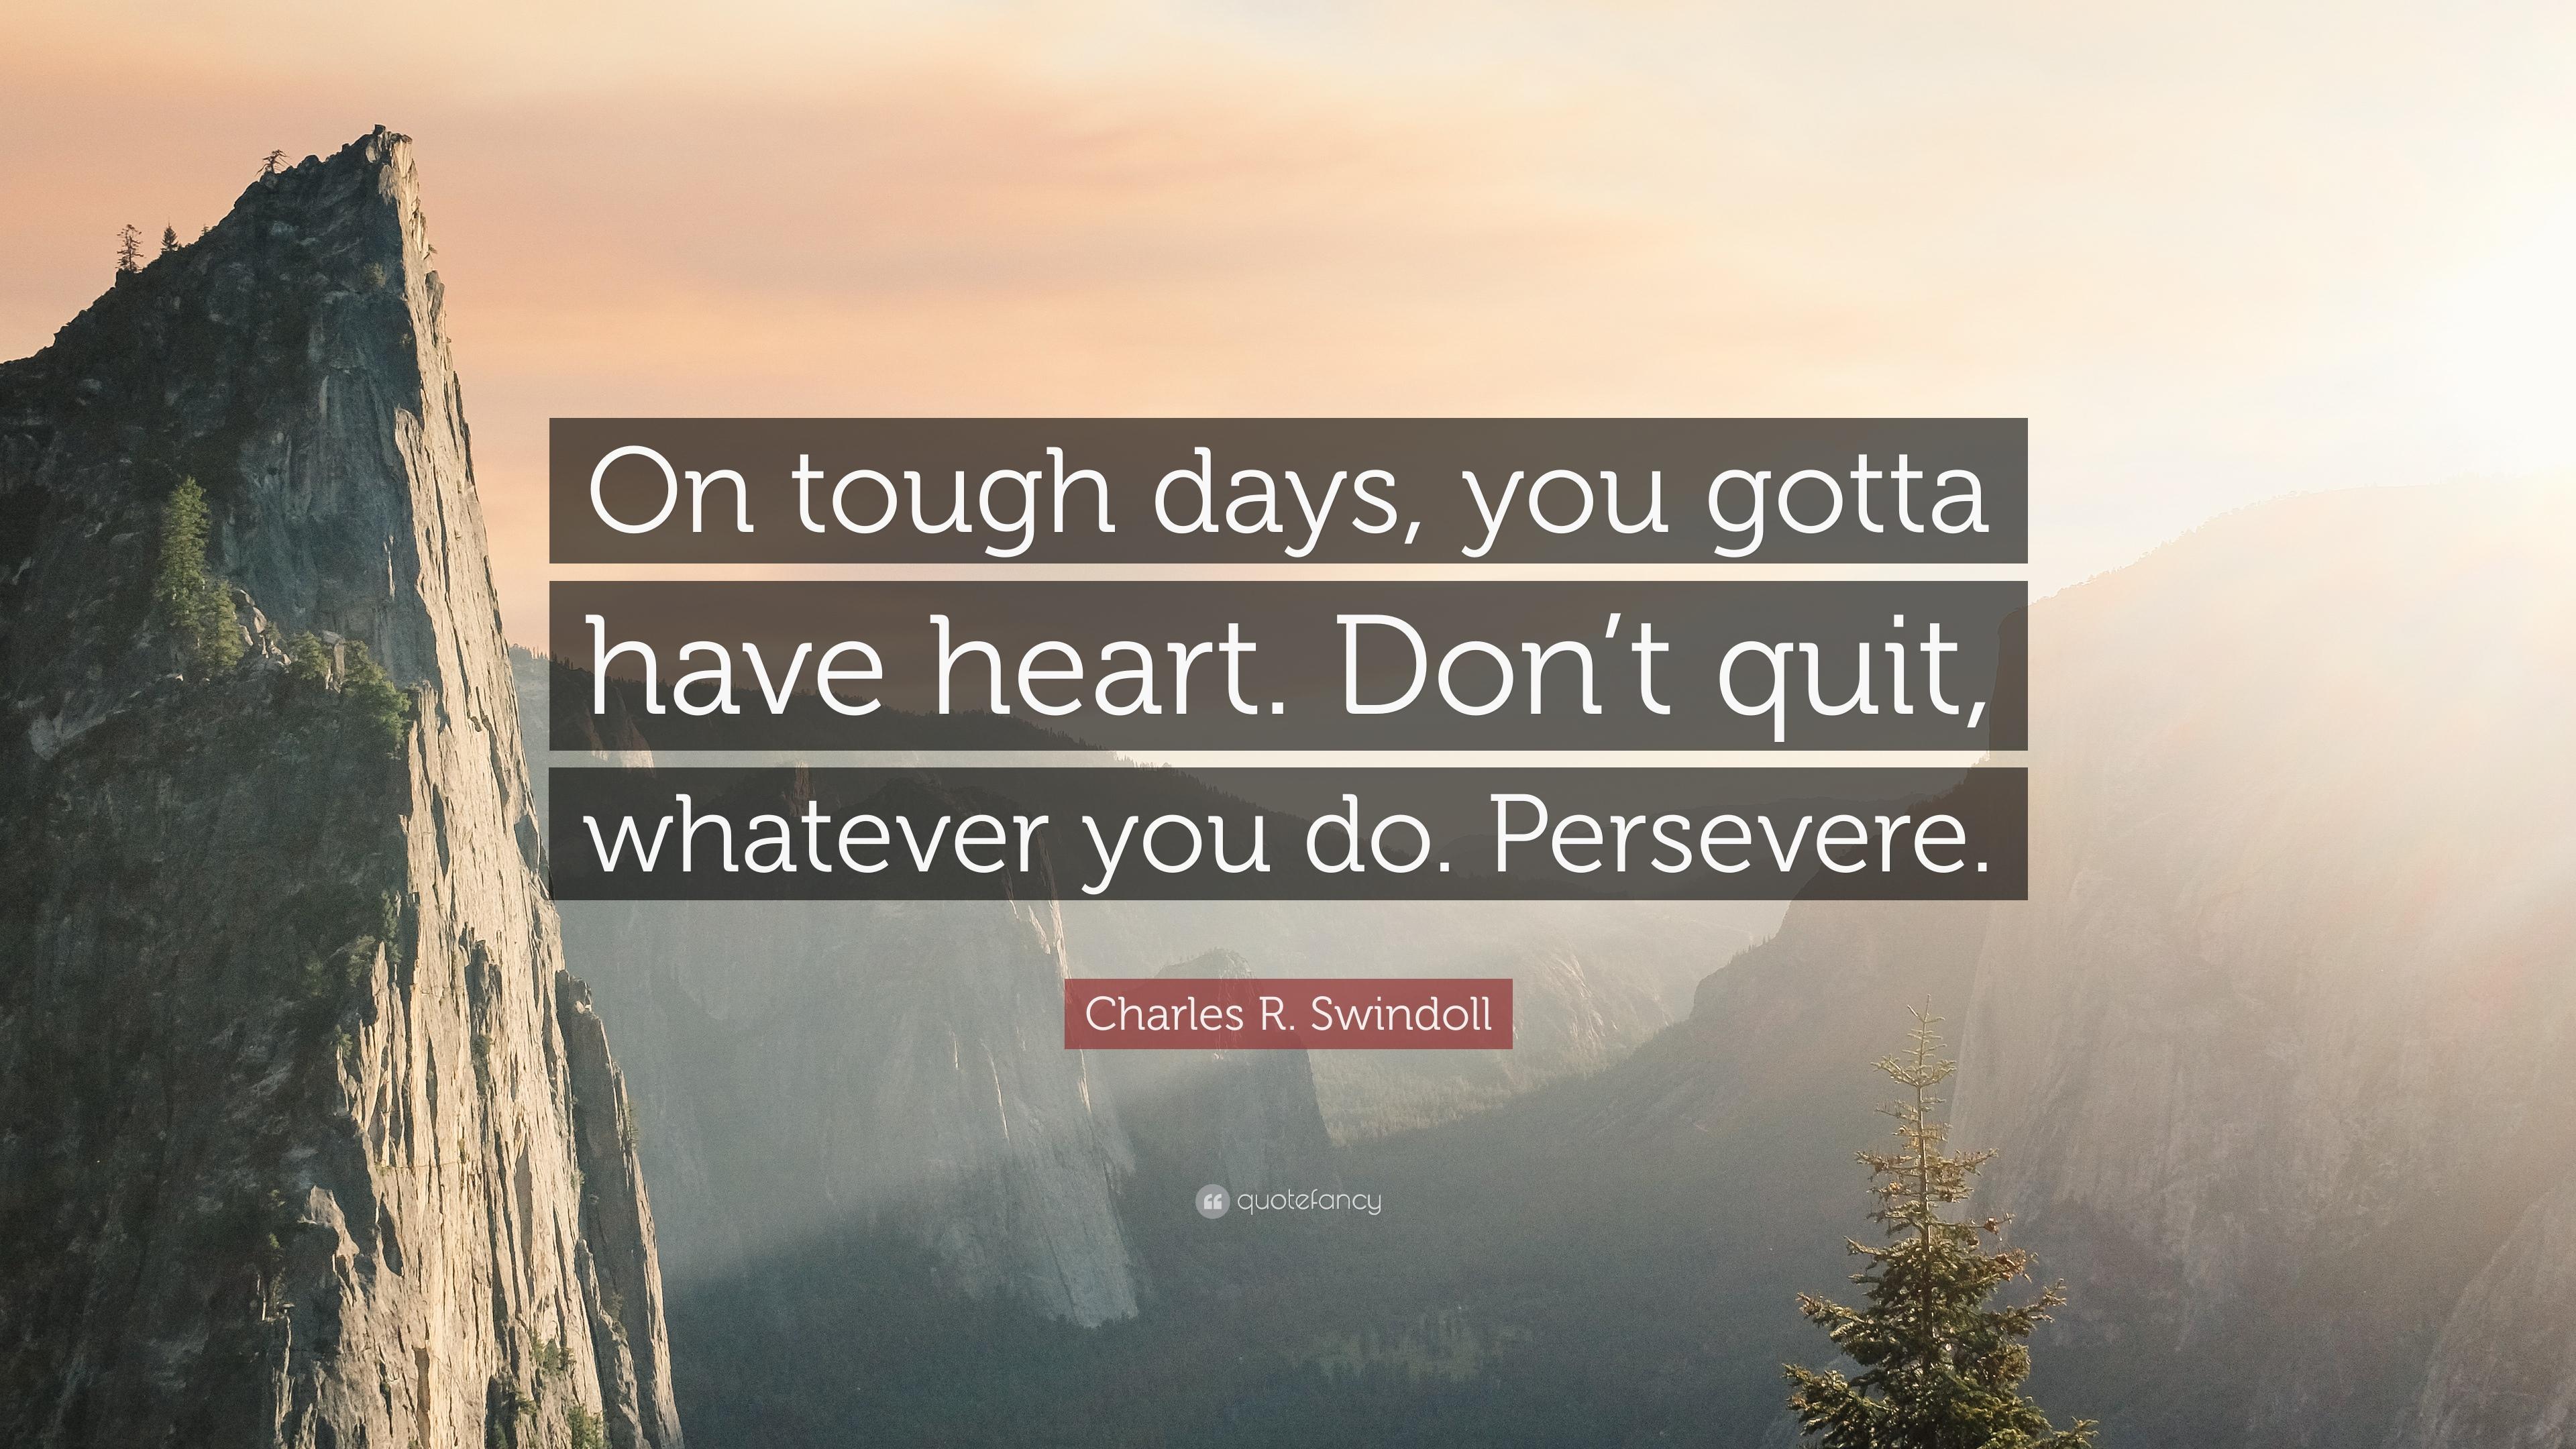 Charles R. Swindoll Quote: “On tough days, you gotta have